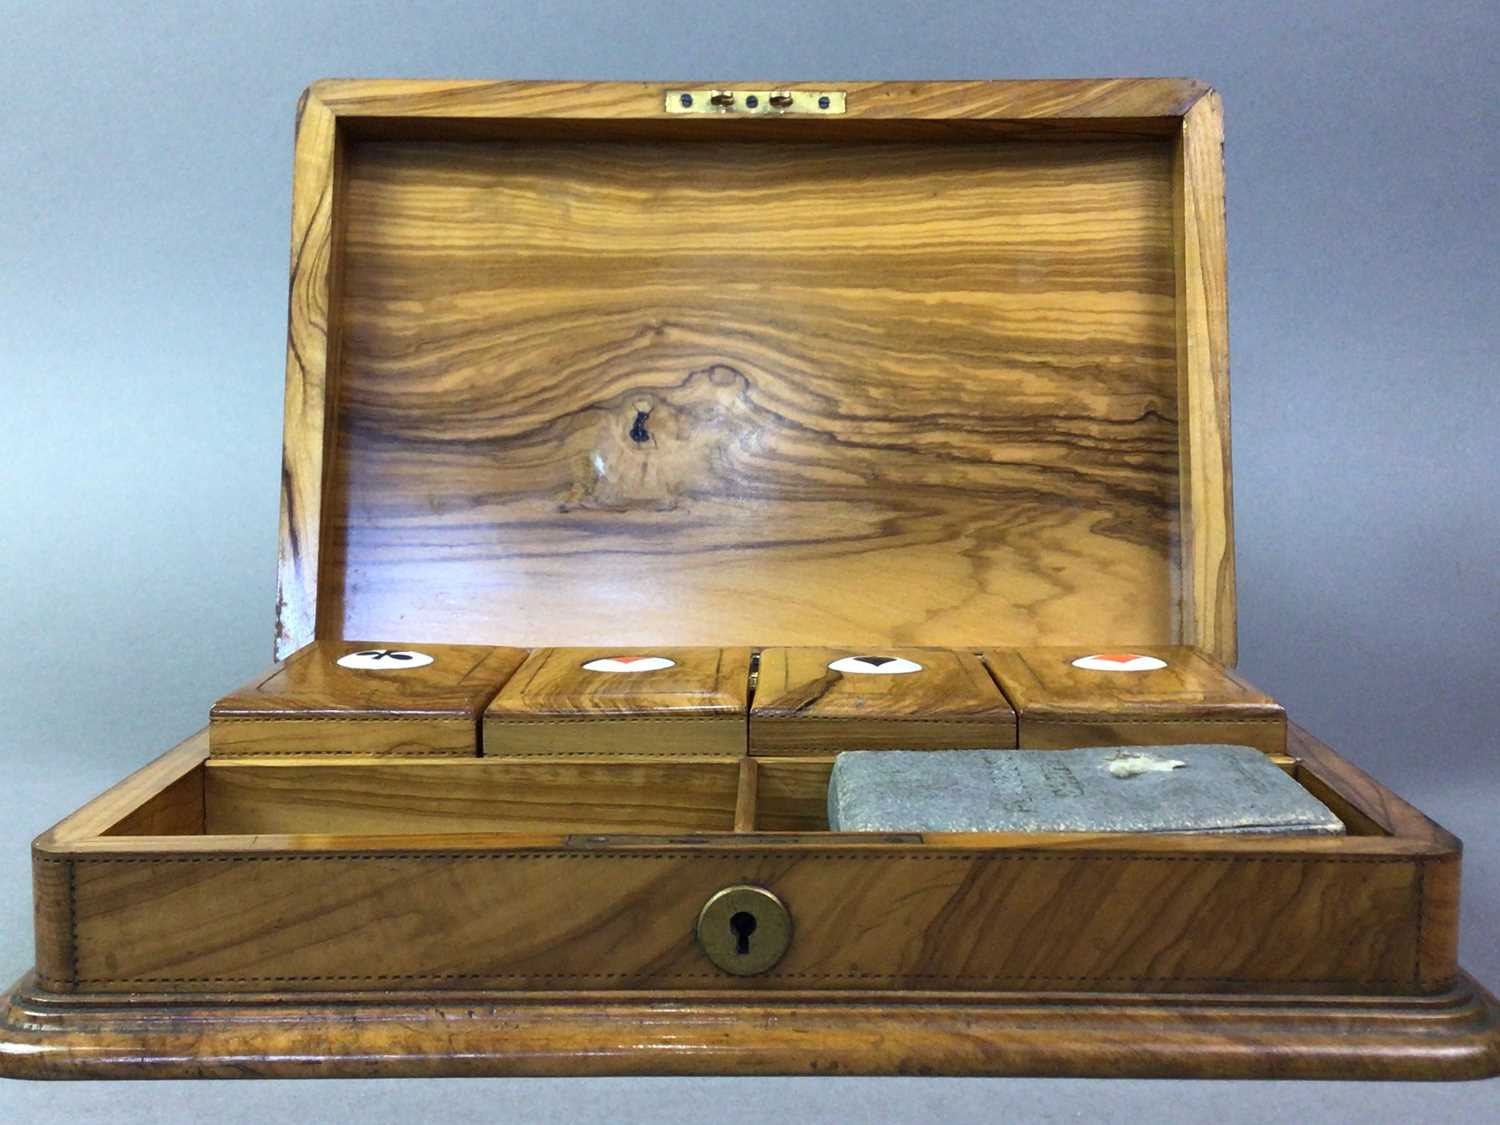 OLIVEWOOD PLAYING CARD BOX BAZAR VAUDOIS OF LAUSANNE